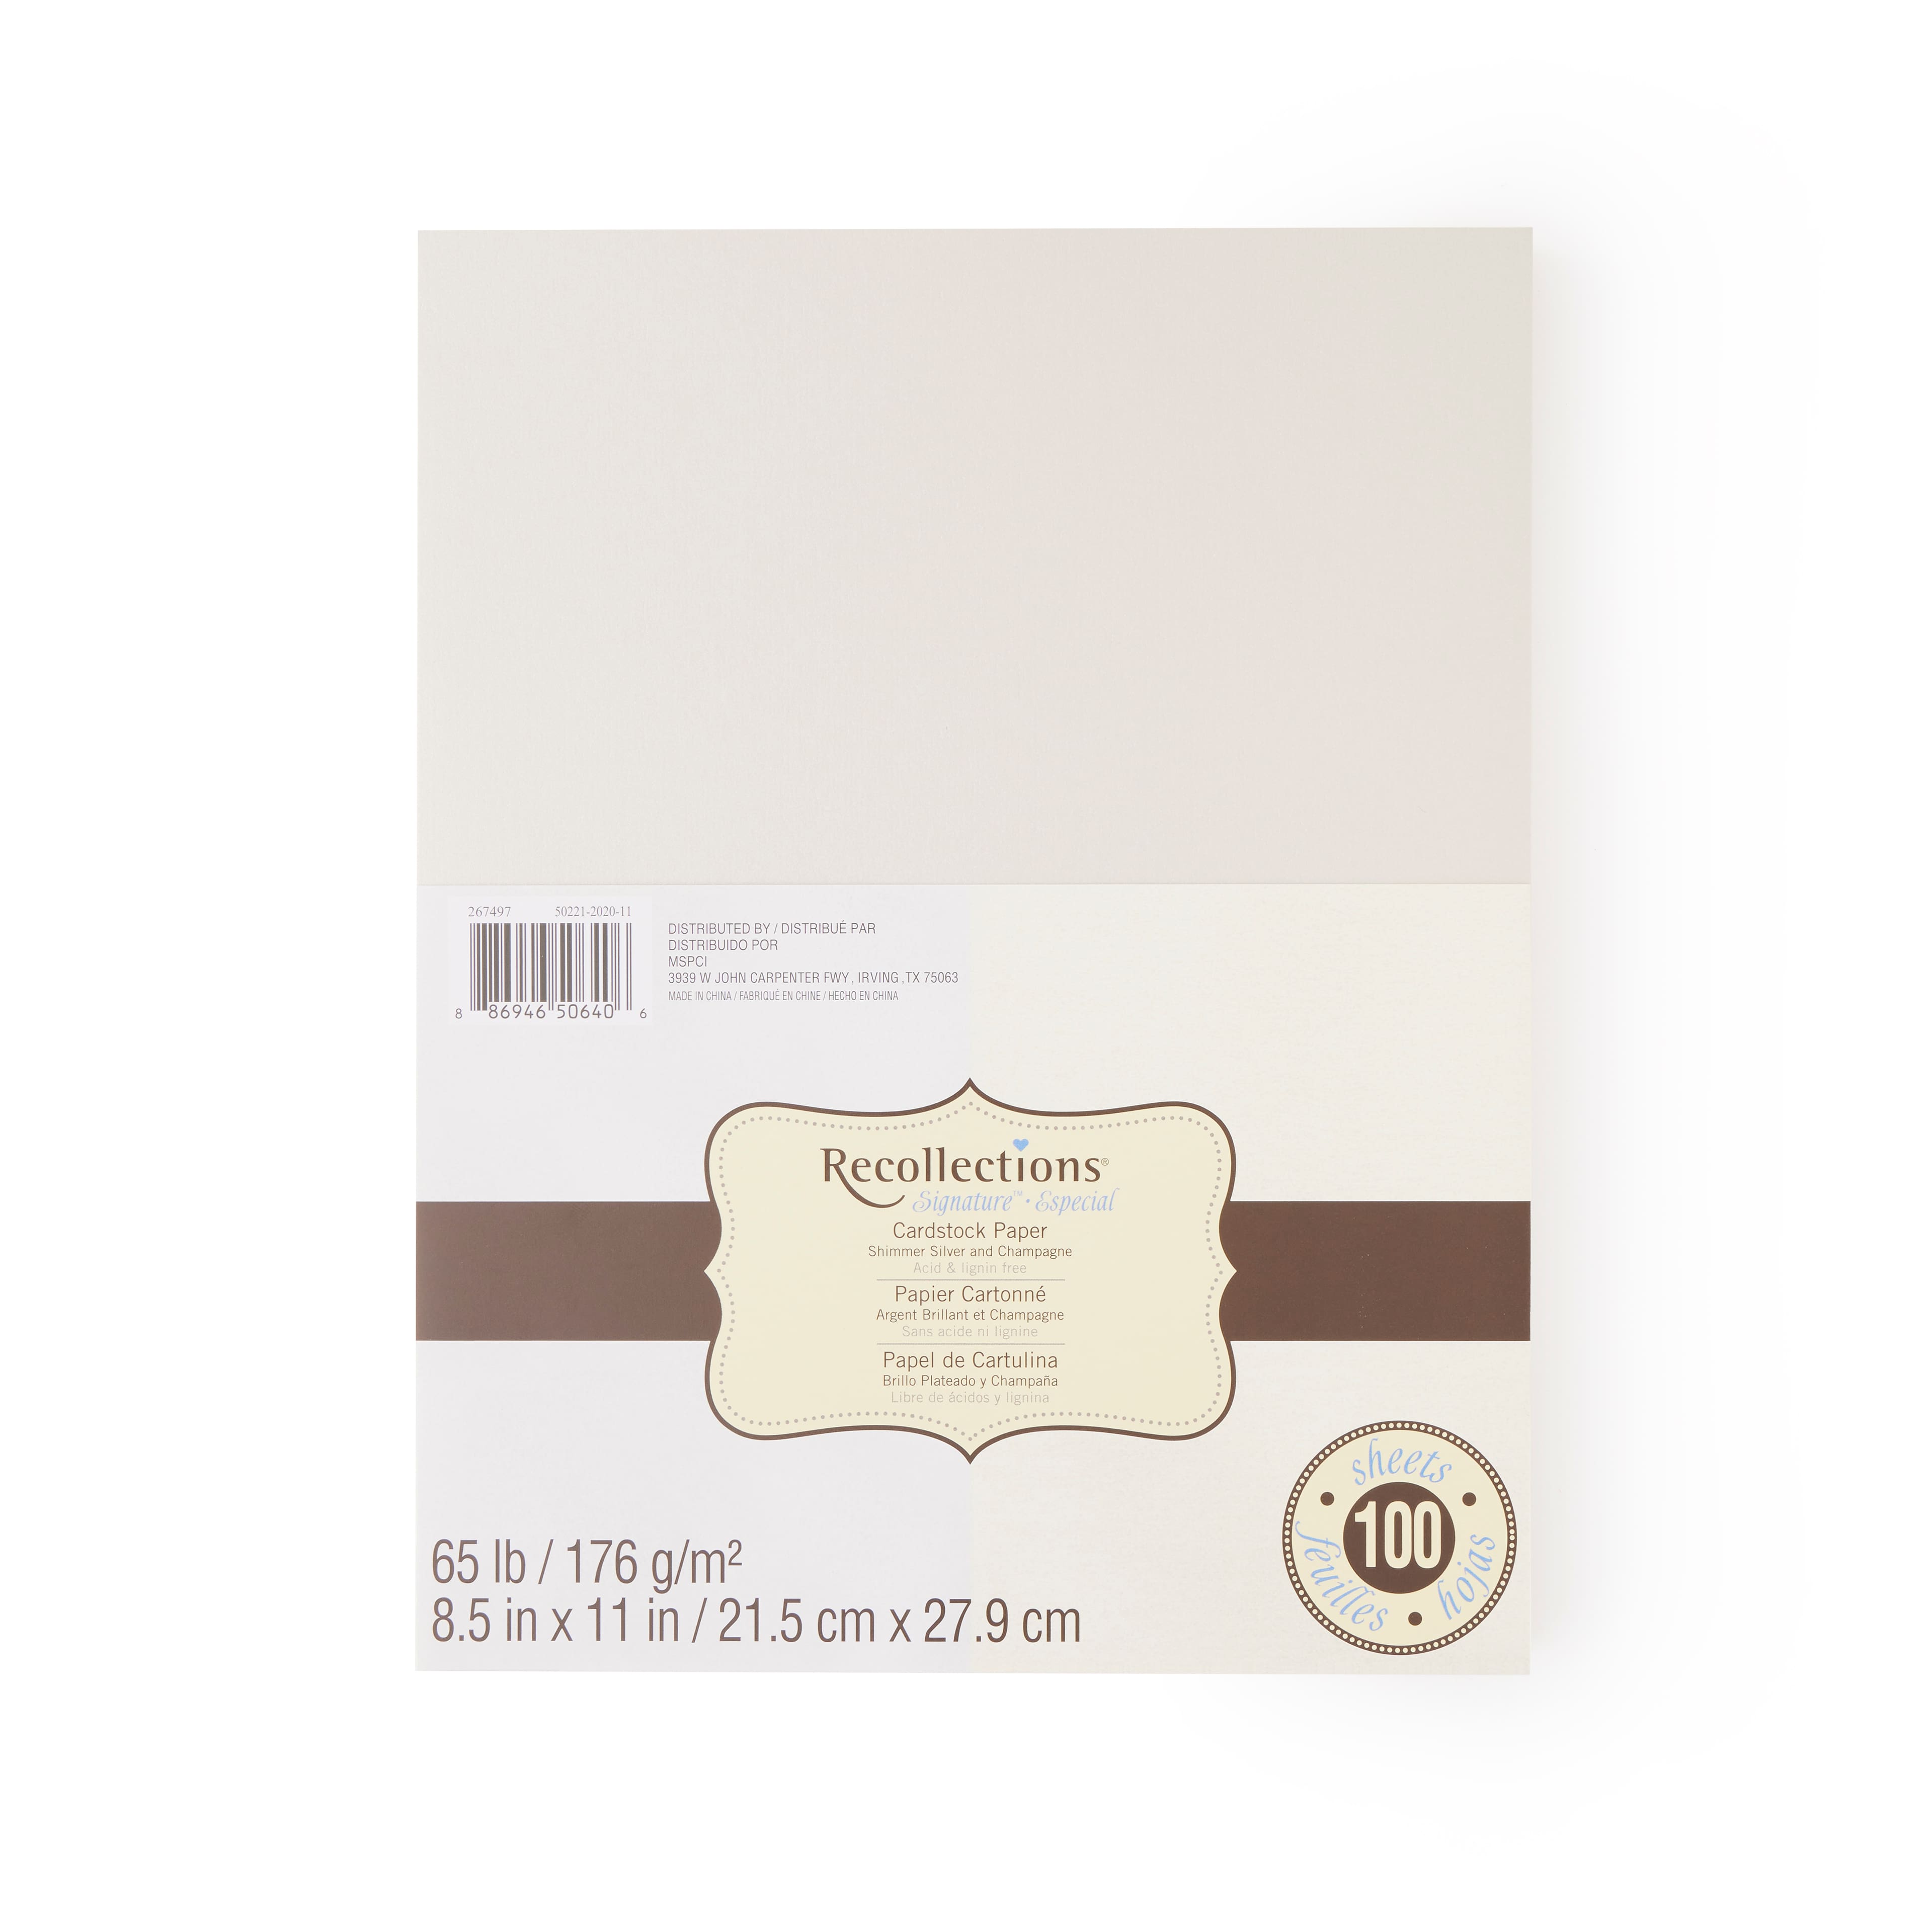 shimmer-silver-champagne-8-5-x-11-cardstock-paper-by-recollections-100-sheets-michaels